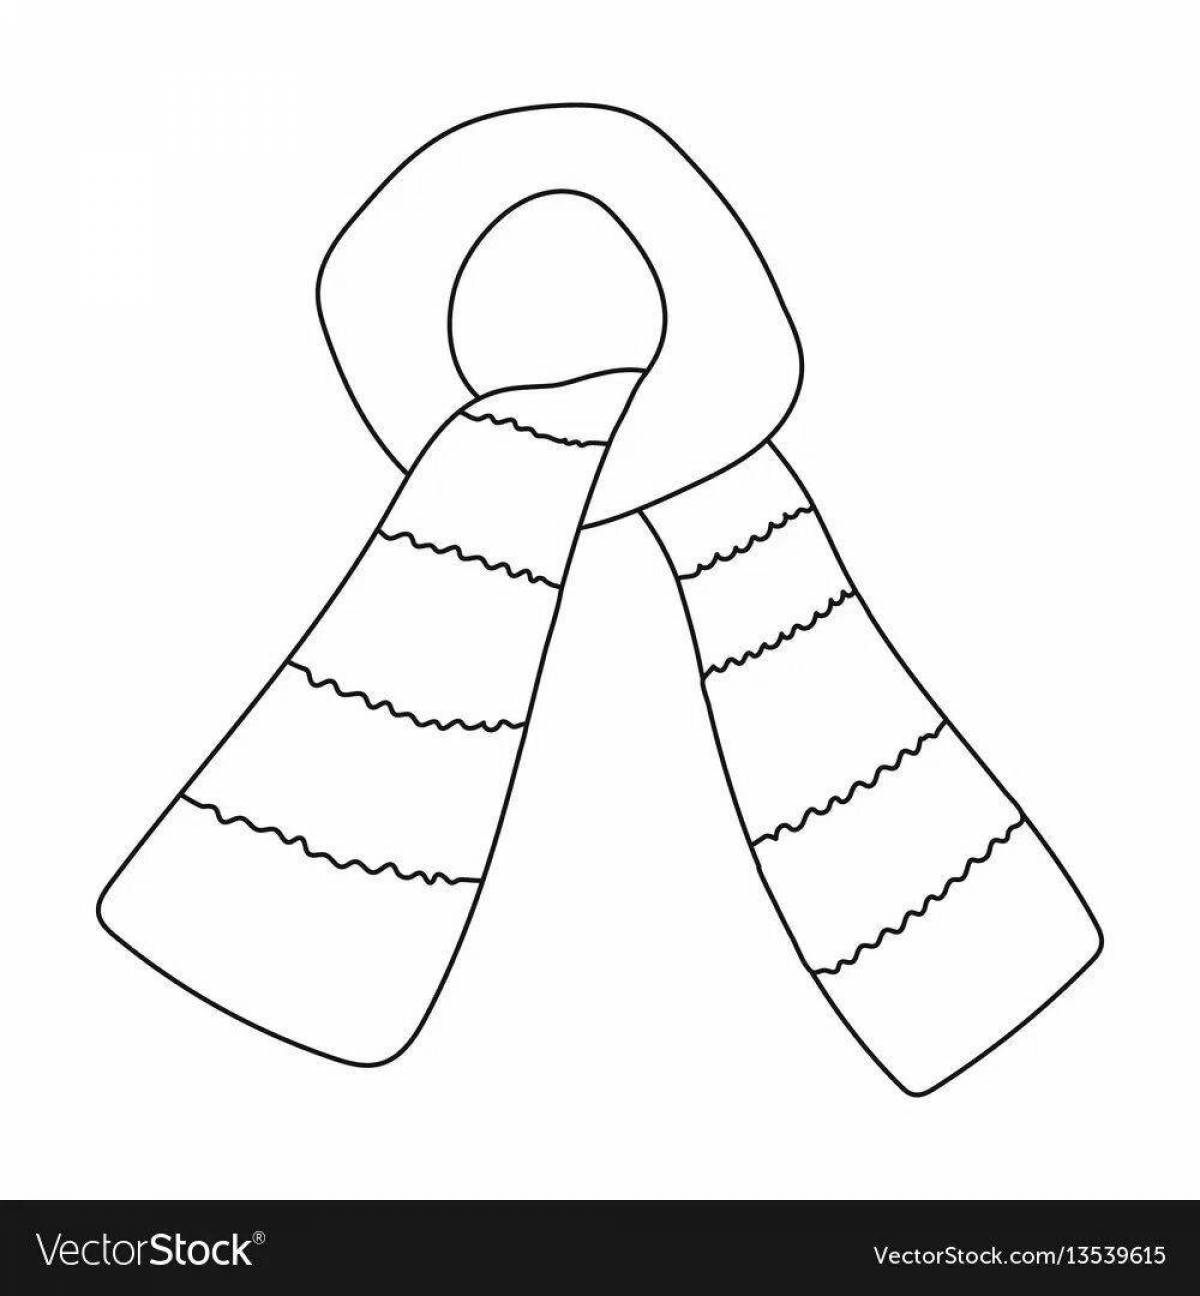 Glowing snowman scarf coloring page